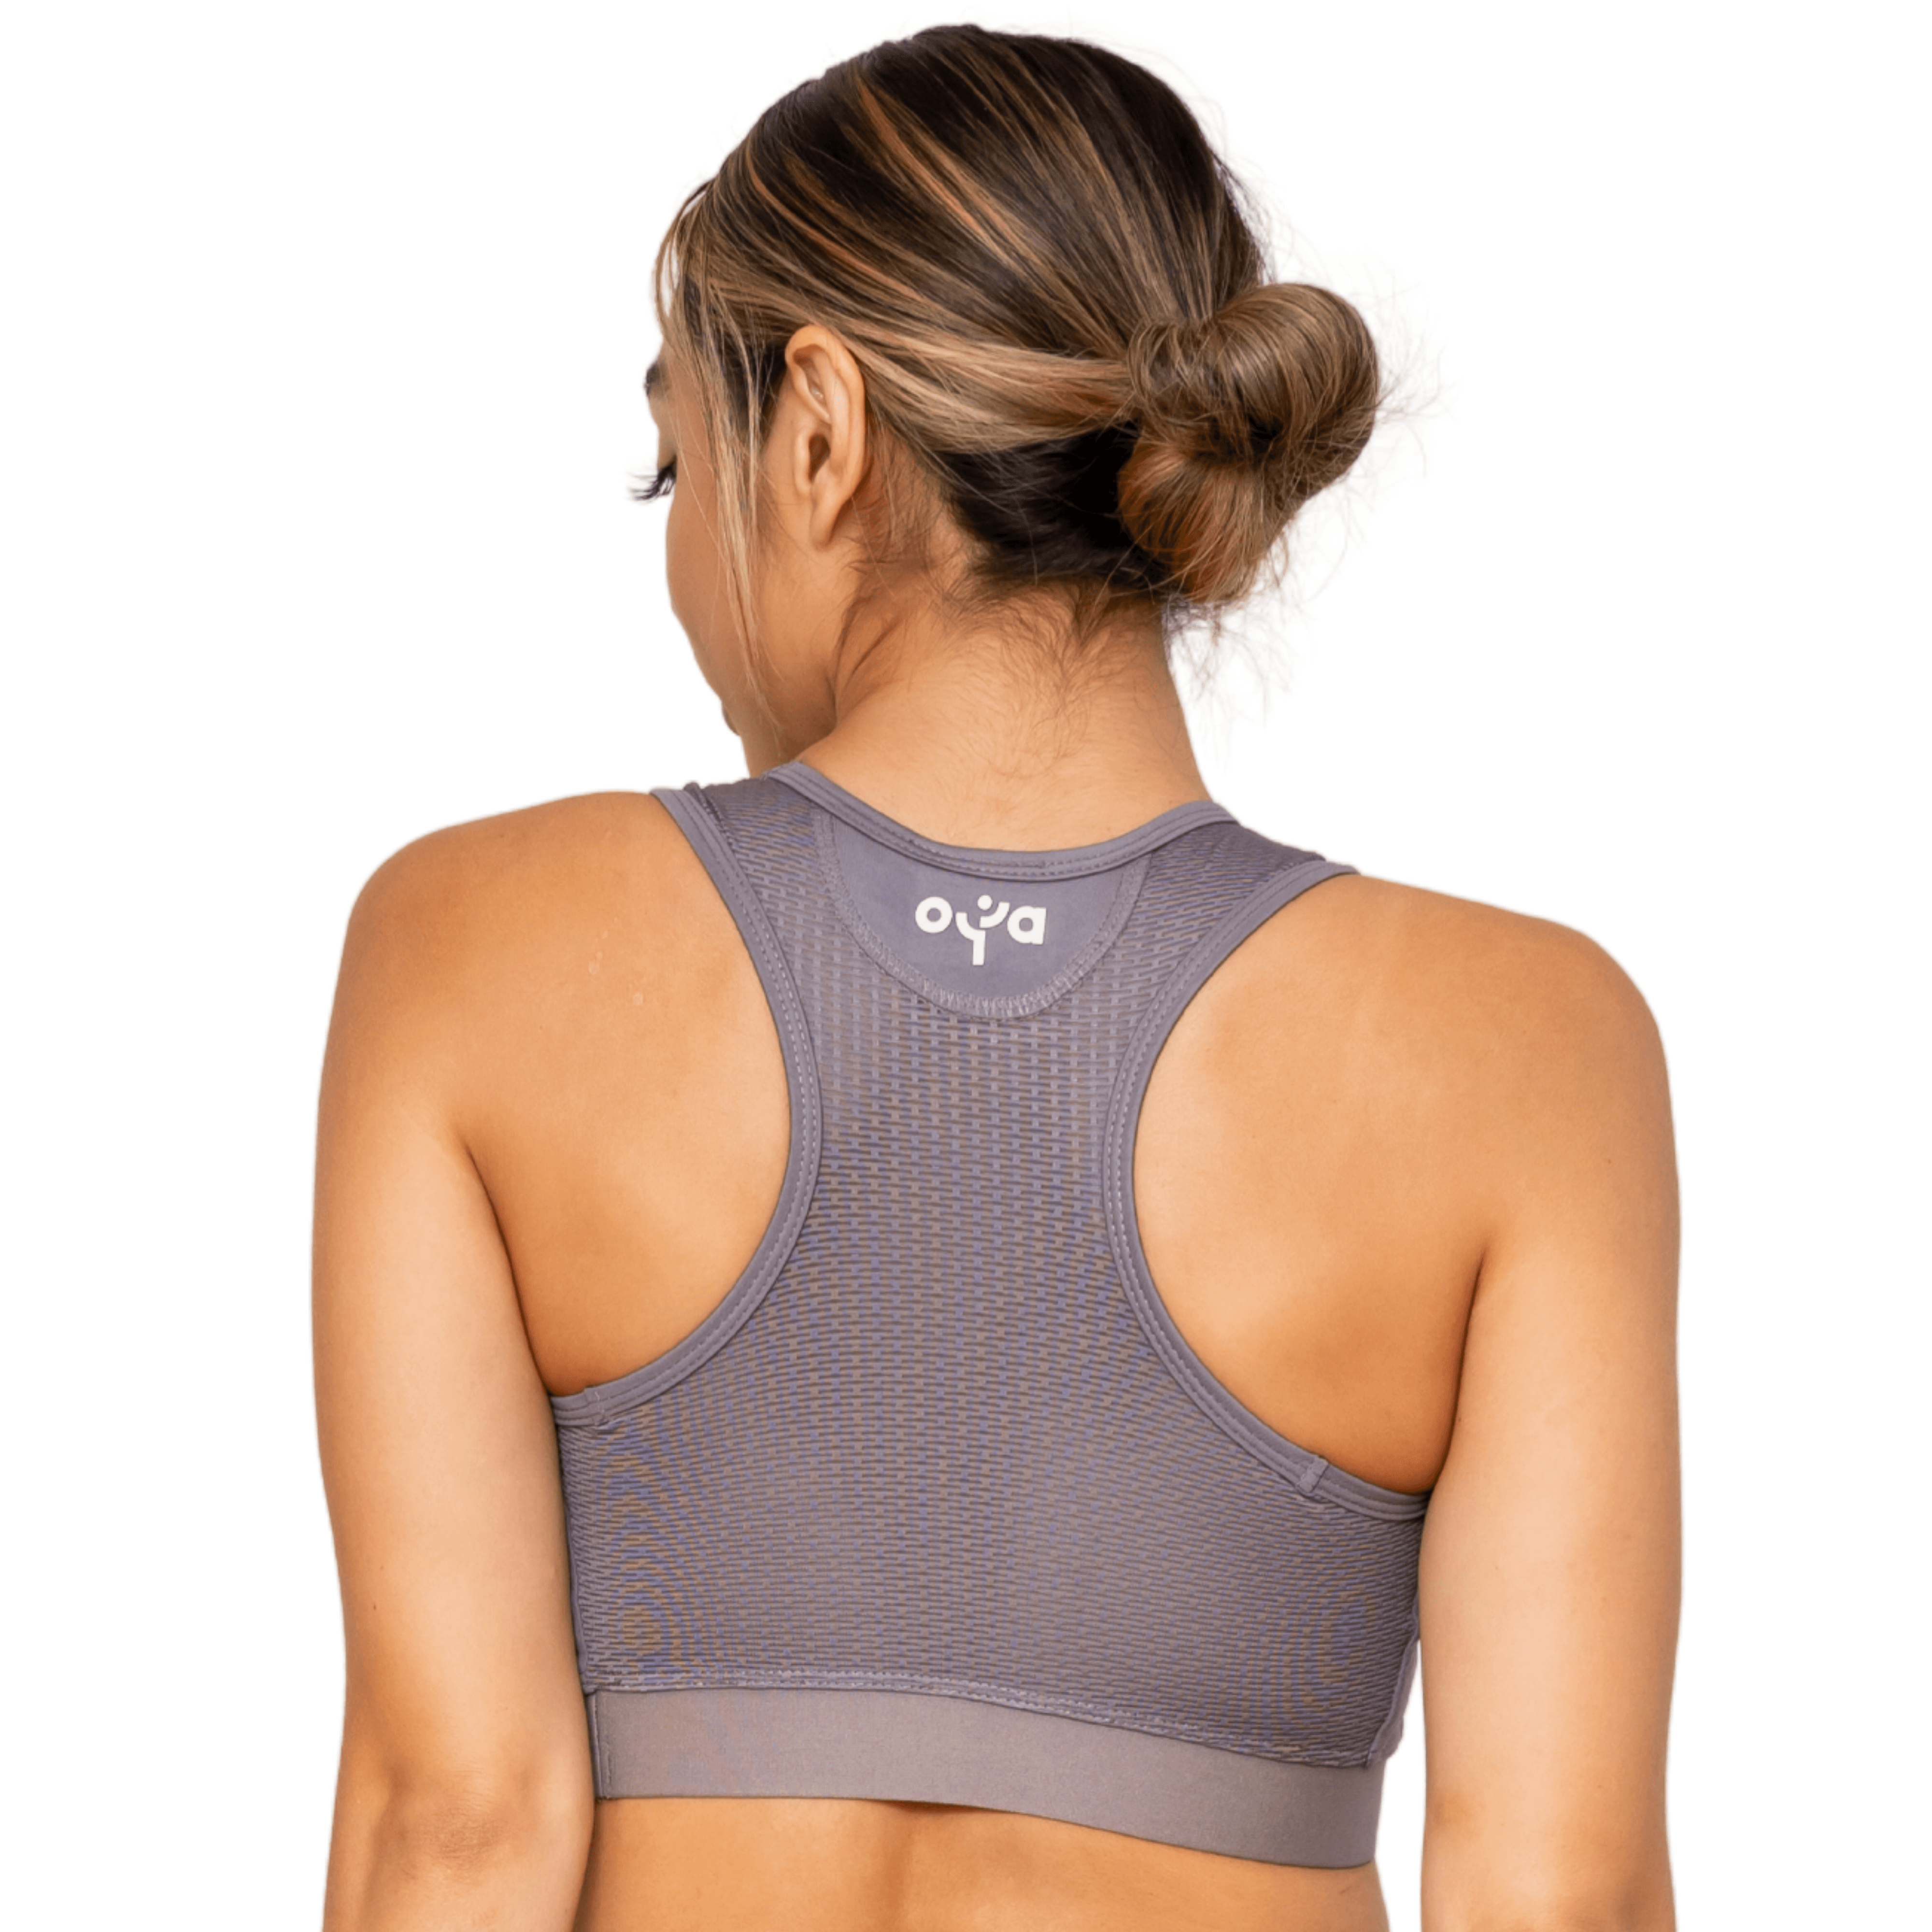  Womens V-neck Racerback Bra, Moisture-wicking Athletic For  Women, Moderate Support Sports Bra, Oxford Grey Heather/White/Black,  X-Small US